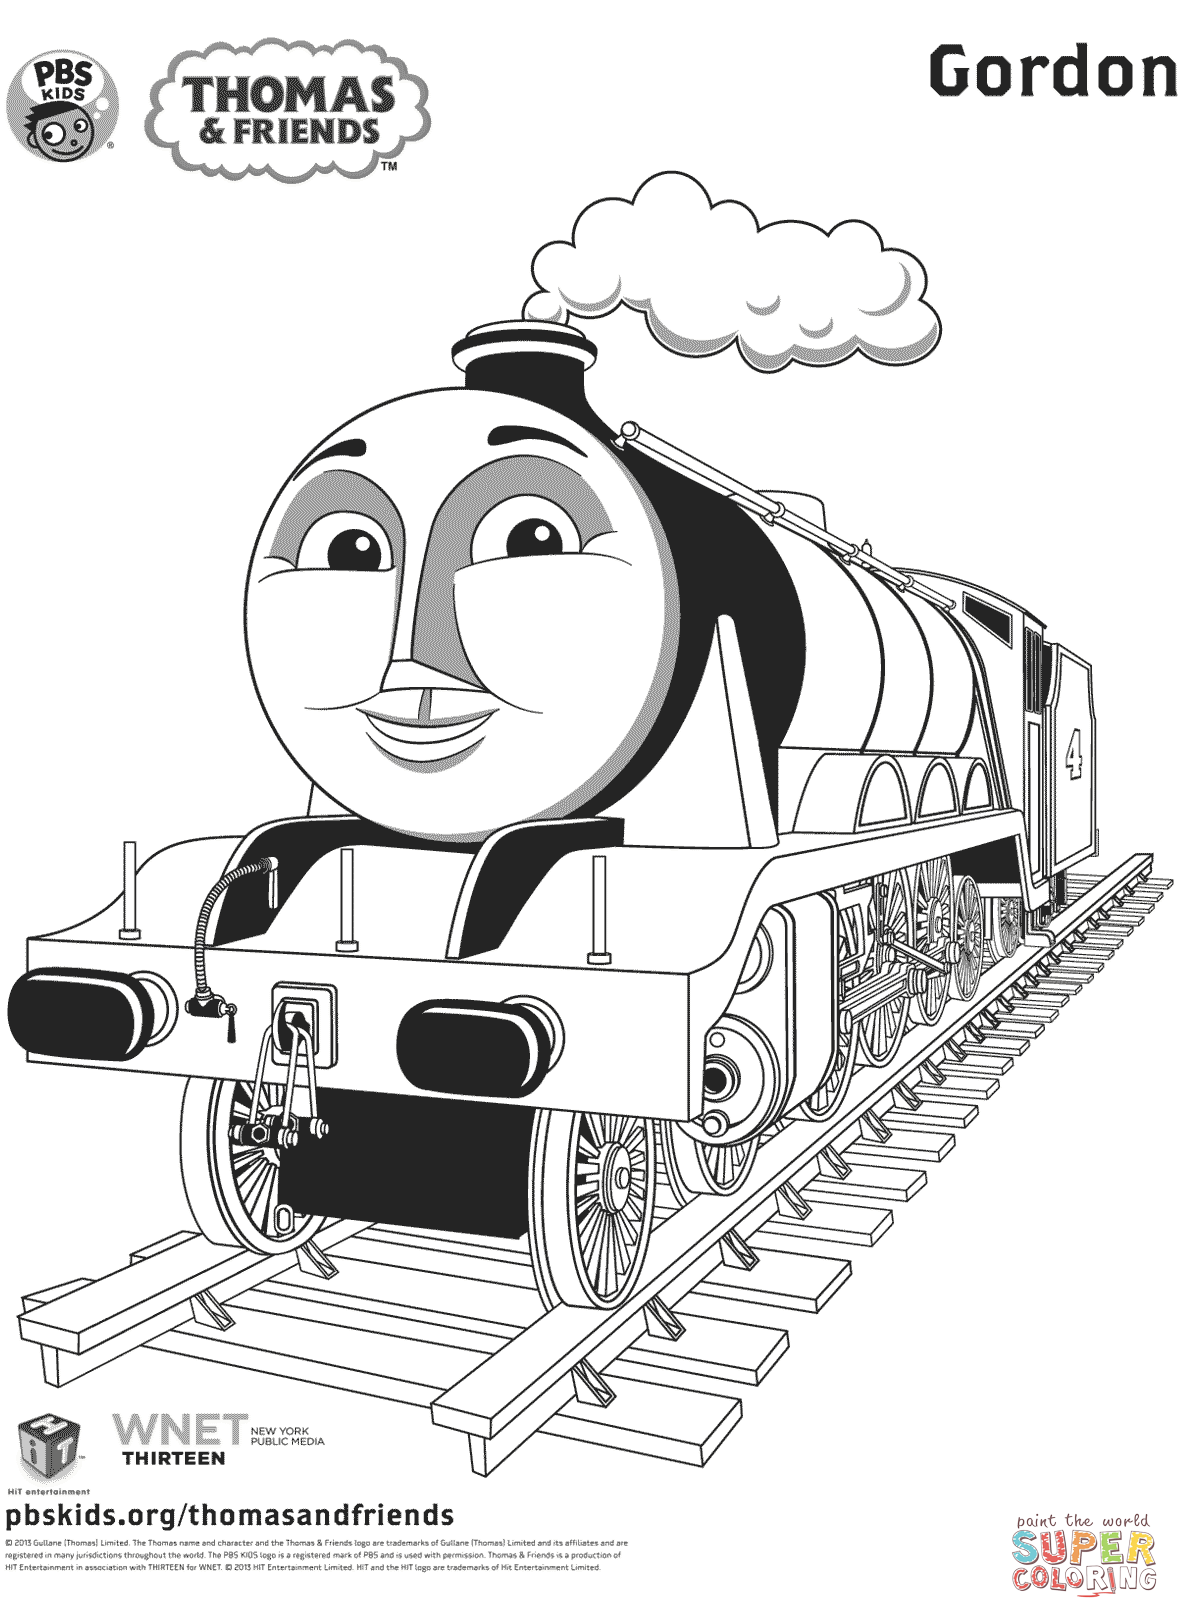 Gordon from thomas friends coloring page free printable coloring pages